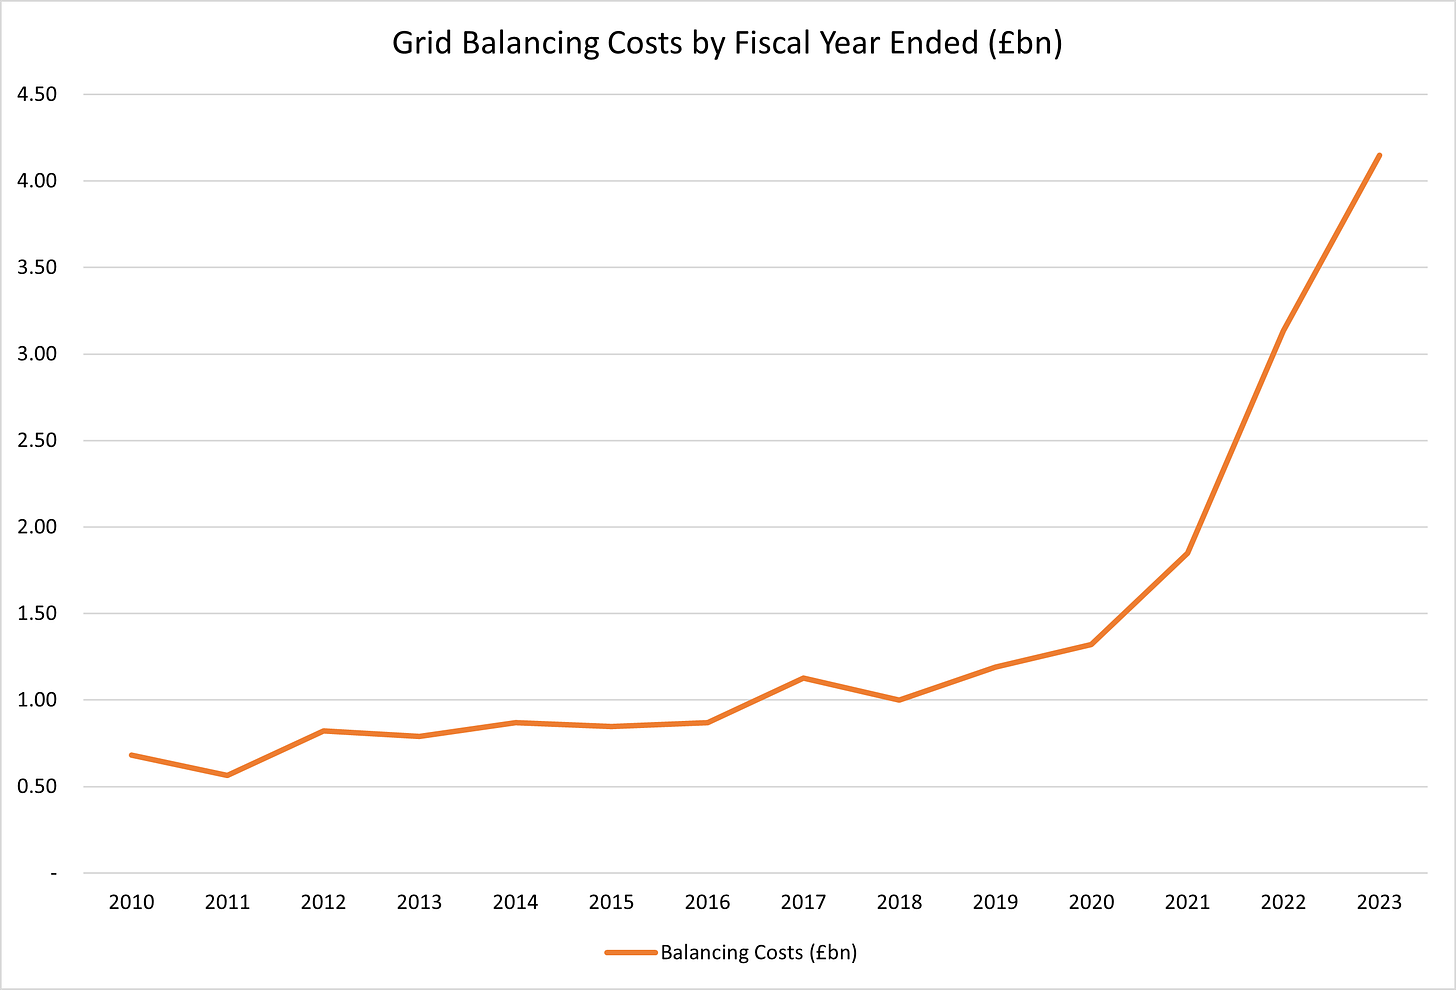 Figure 8 - Grid Balancing Costs by FIscal Year Ended (£bn)